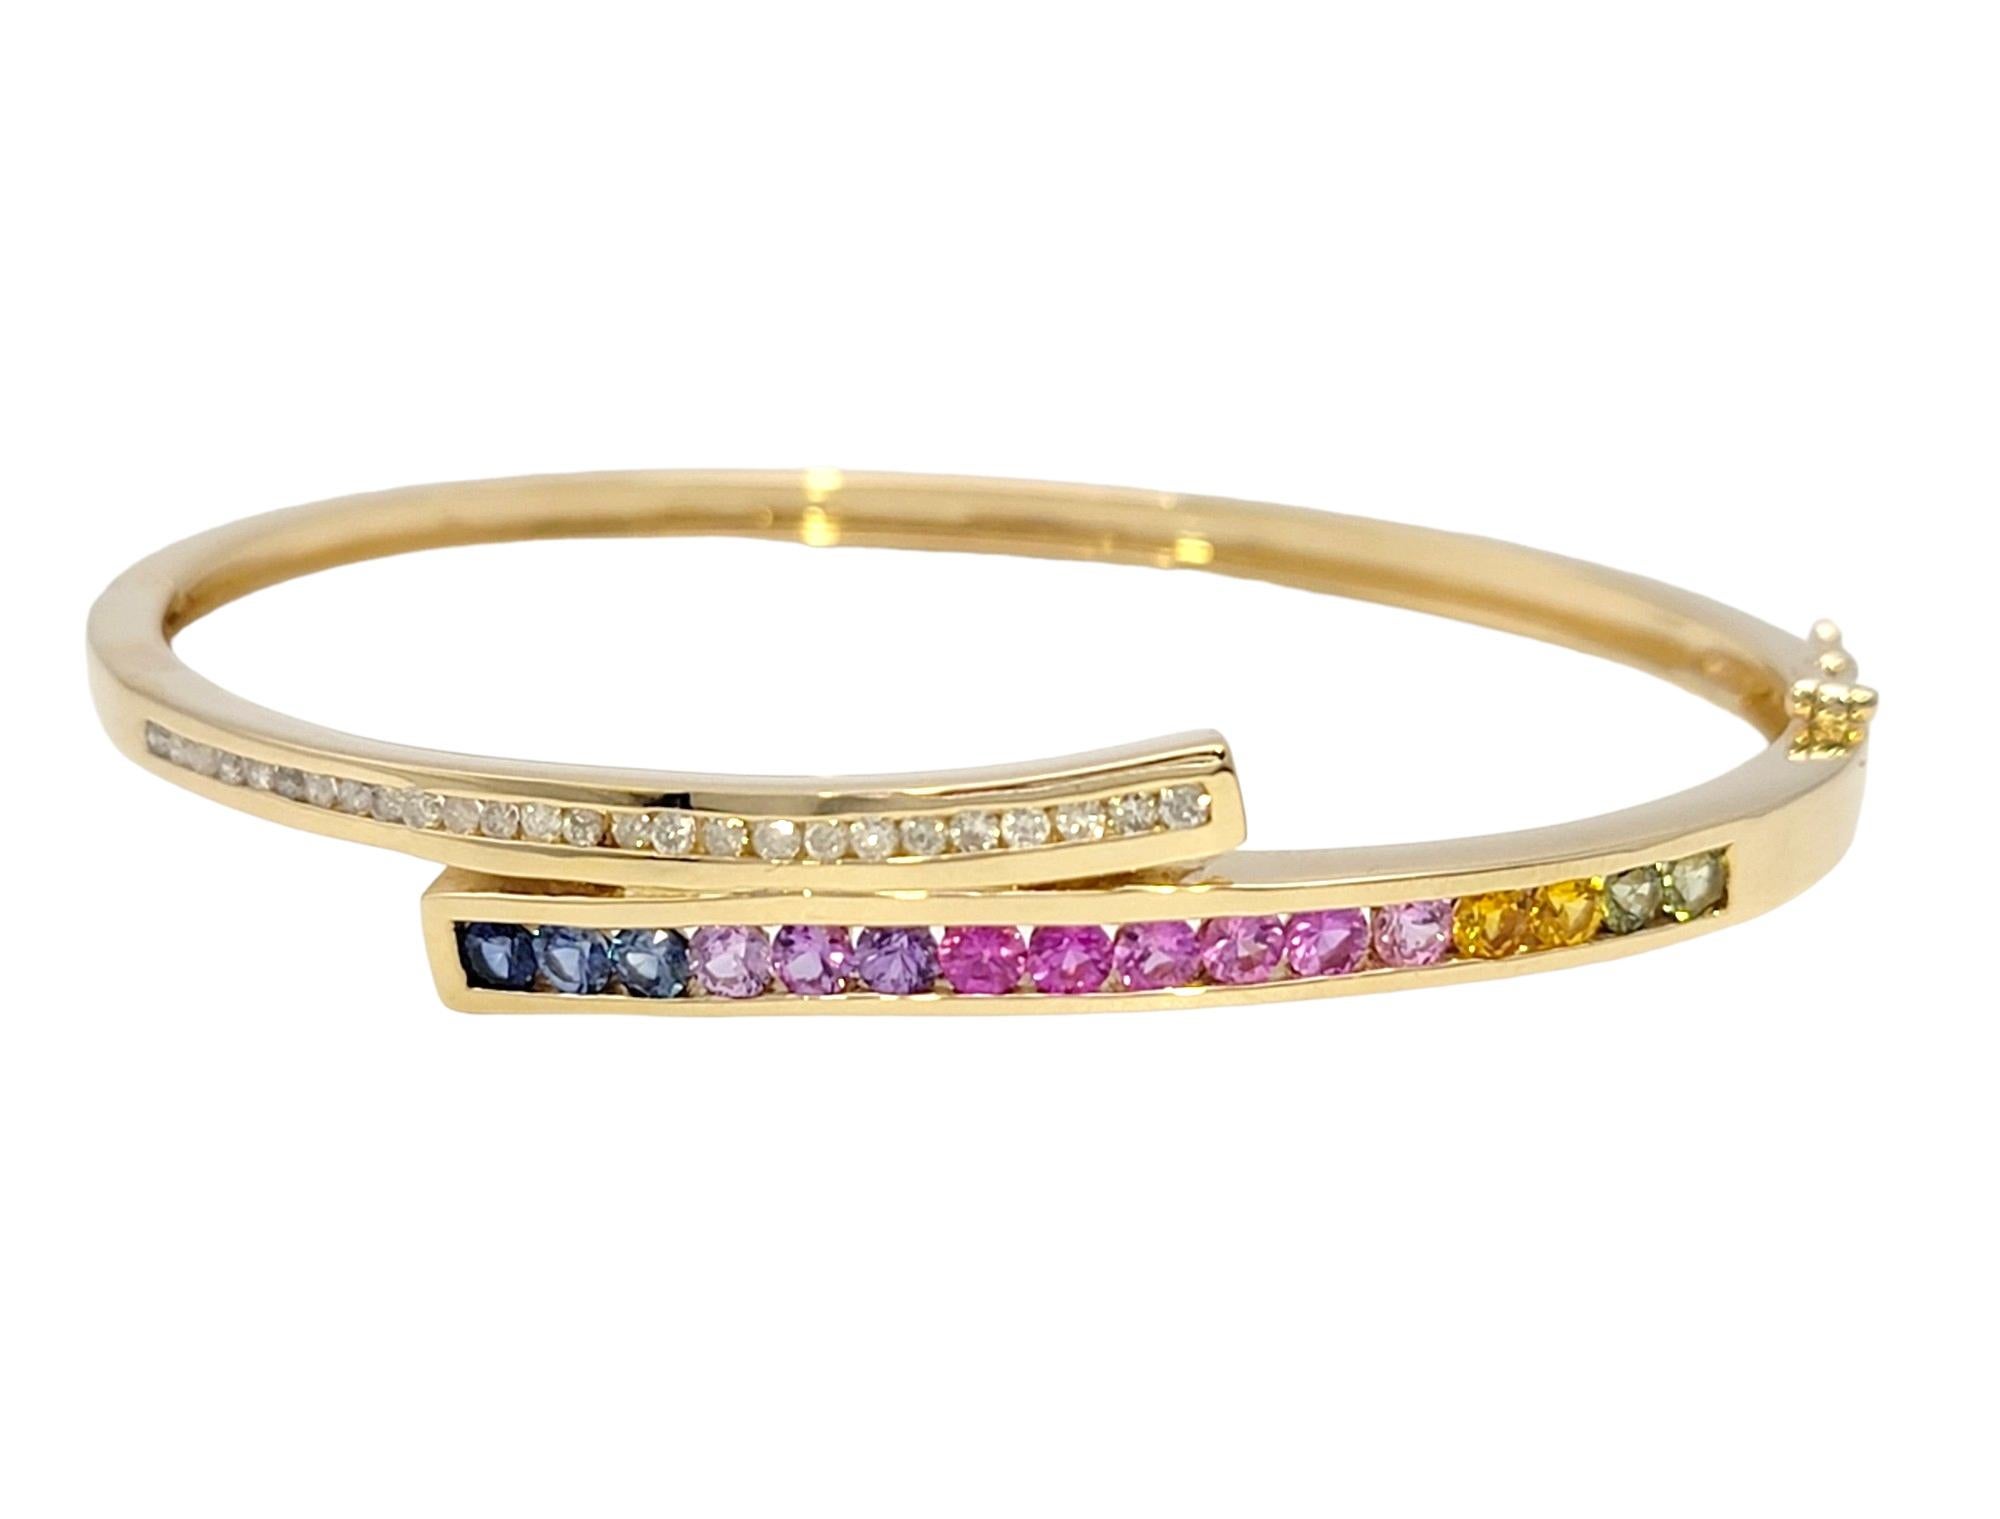  Channel Set Rainbow Sapphire and Diamond Bypass Bangle Bracelet in Yellow Gold In Good Condition For Sale In Scottsdale, AZ